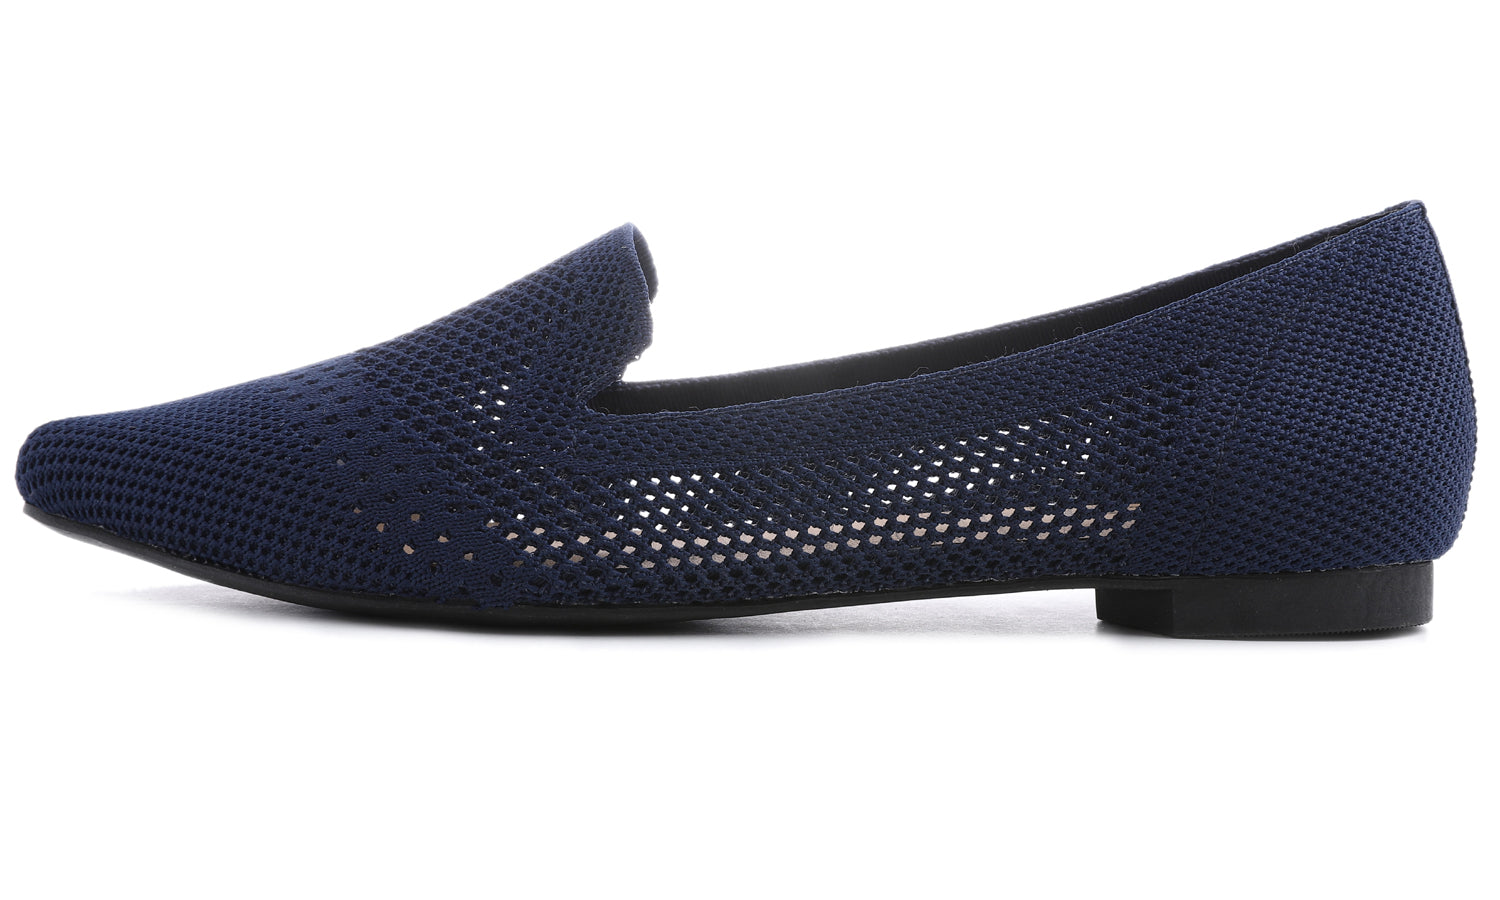 Feversole Women's Woven Fashion Breathable Knit Flat Shoes Pointed Loafer Navy